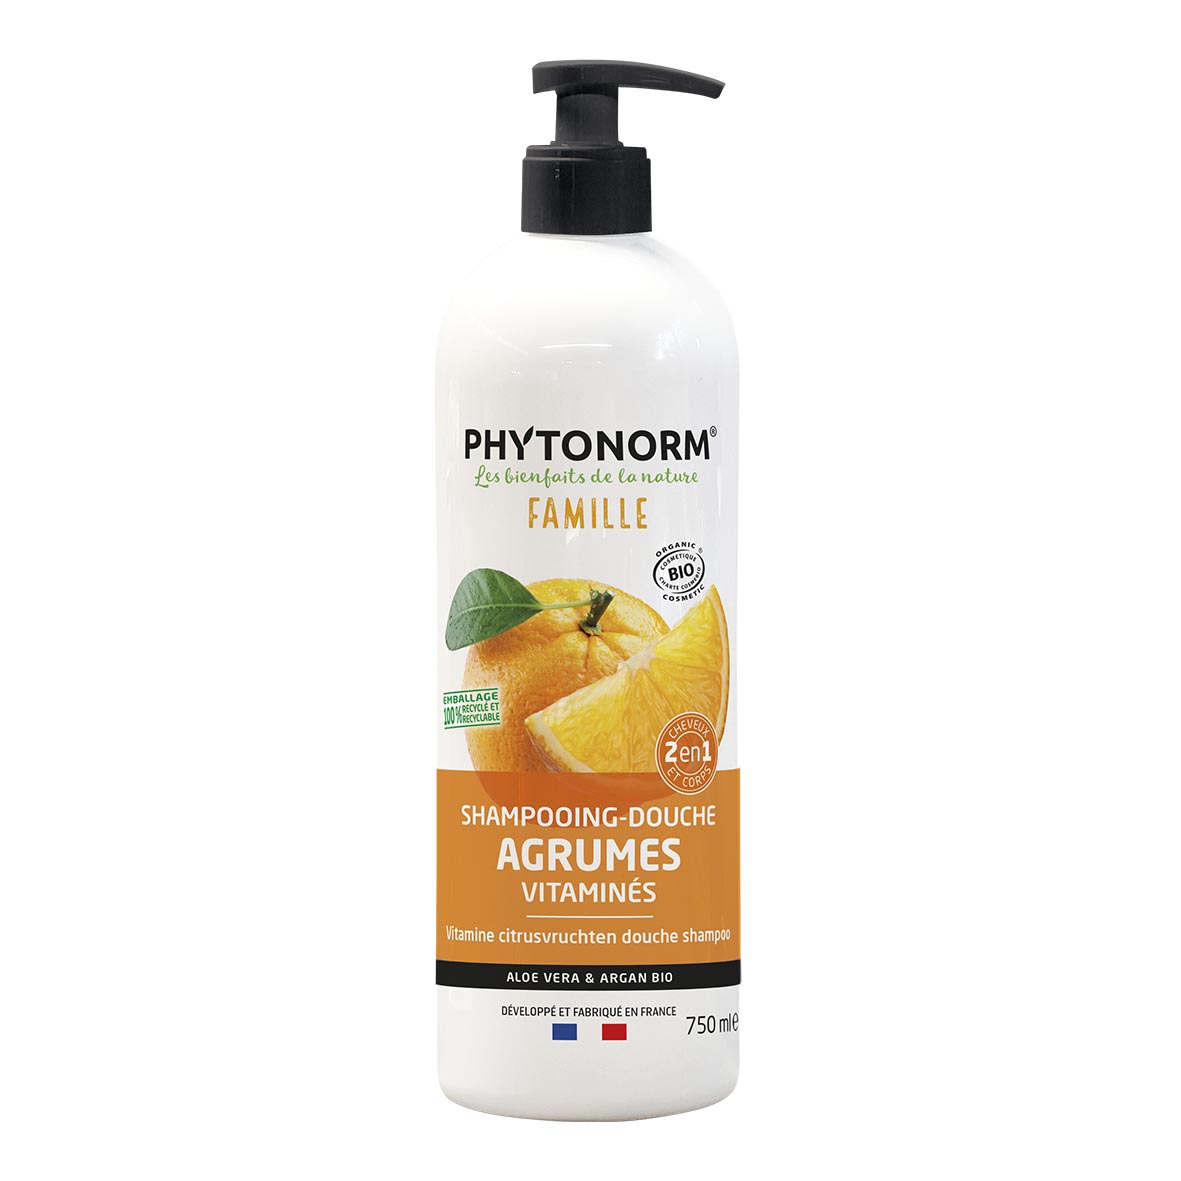 Shampooing-Douche Agrumes Vitaminé